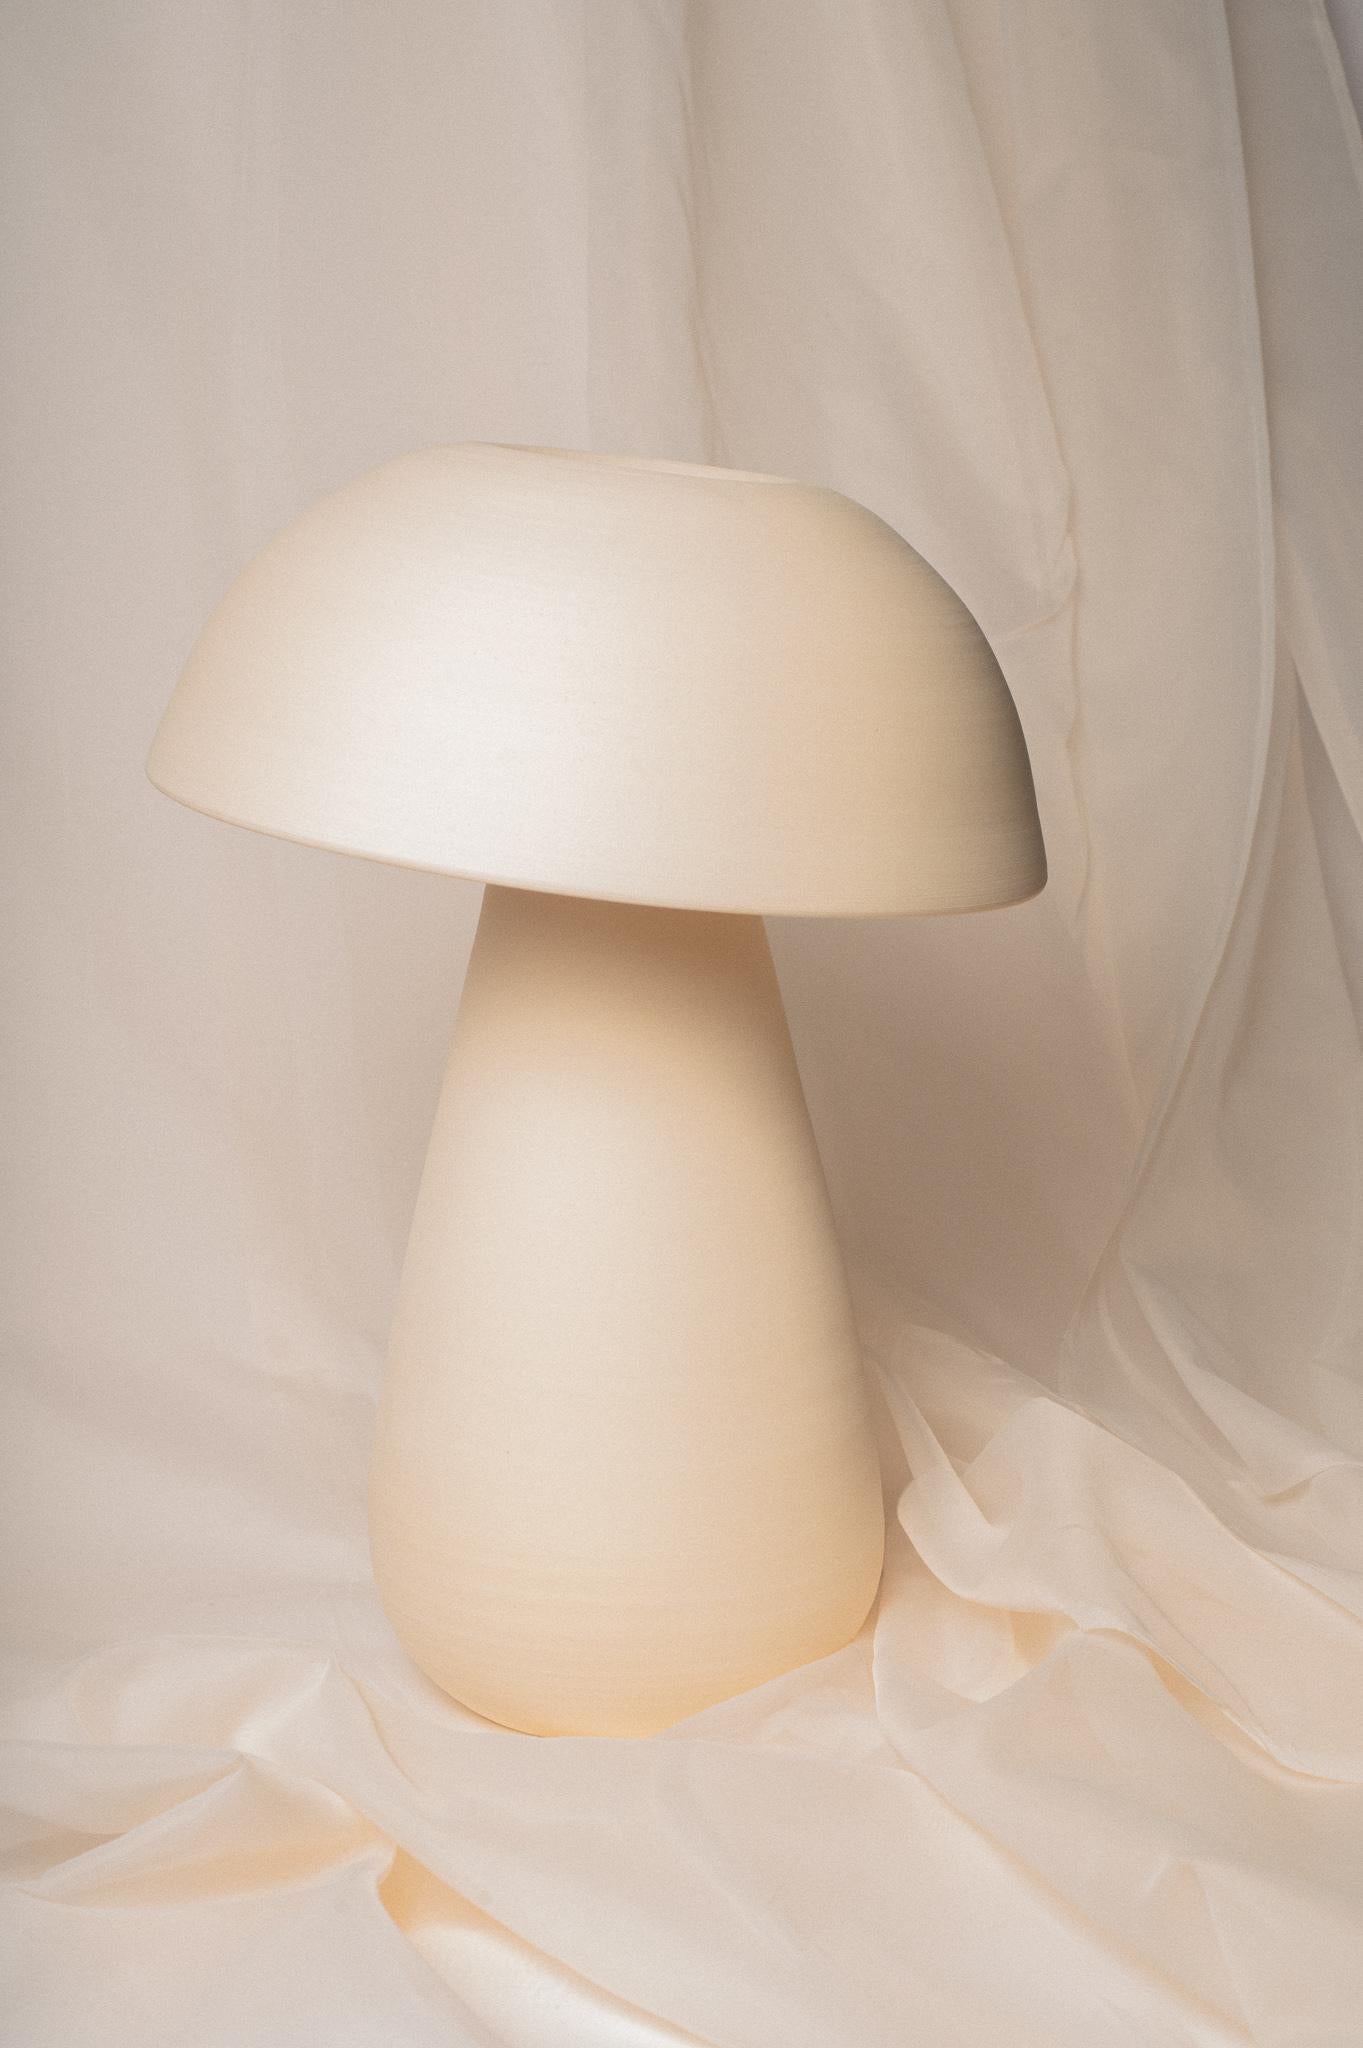 Small Mushroom Lamp by Nick Pourfard
Dimensions: Ø 33 x H 38 cm.
Materials: ceramic.
Different finishes available. Please contact us.

All our lamps can be wired according to each country. If sold to the USA it will be wired for the USA for